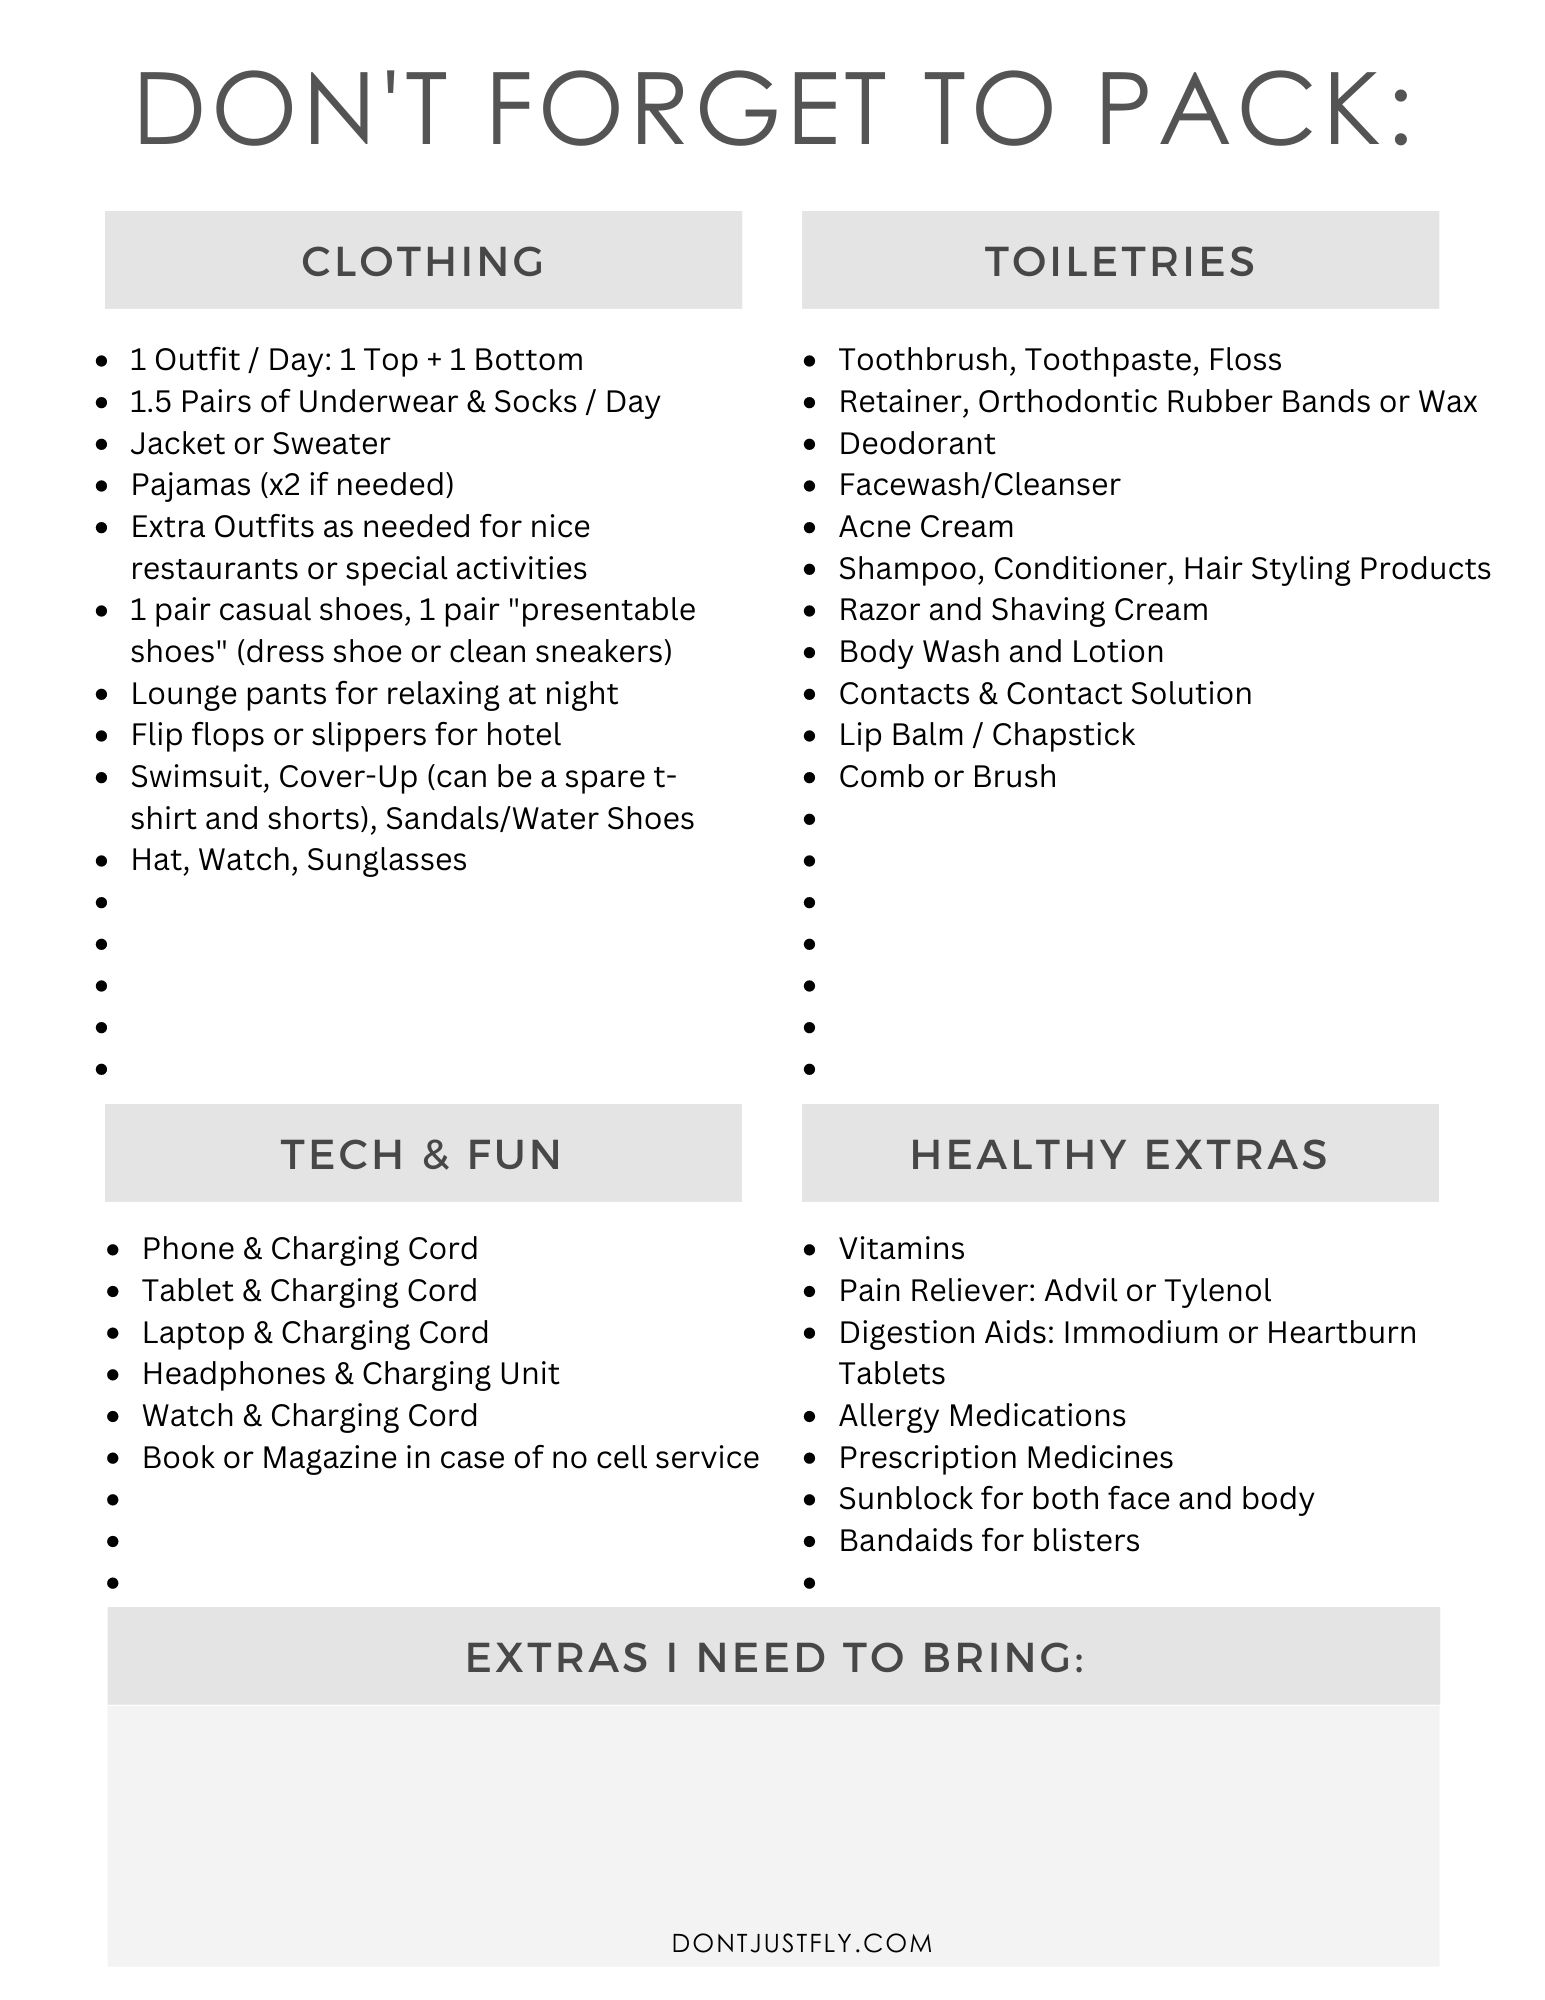 The image shows a preview of the printable packing list for teenage boys.